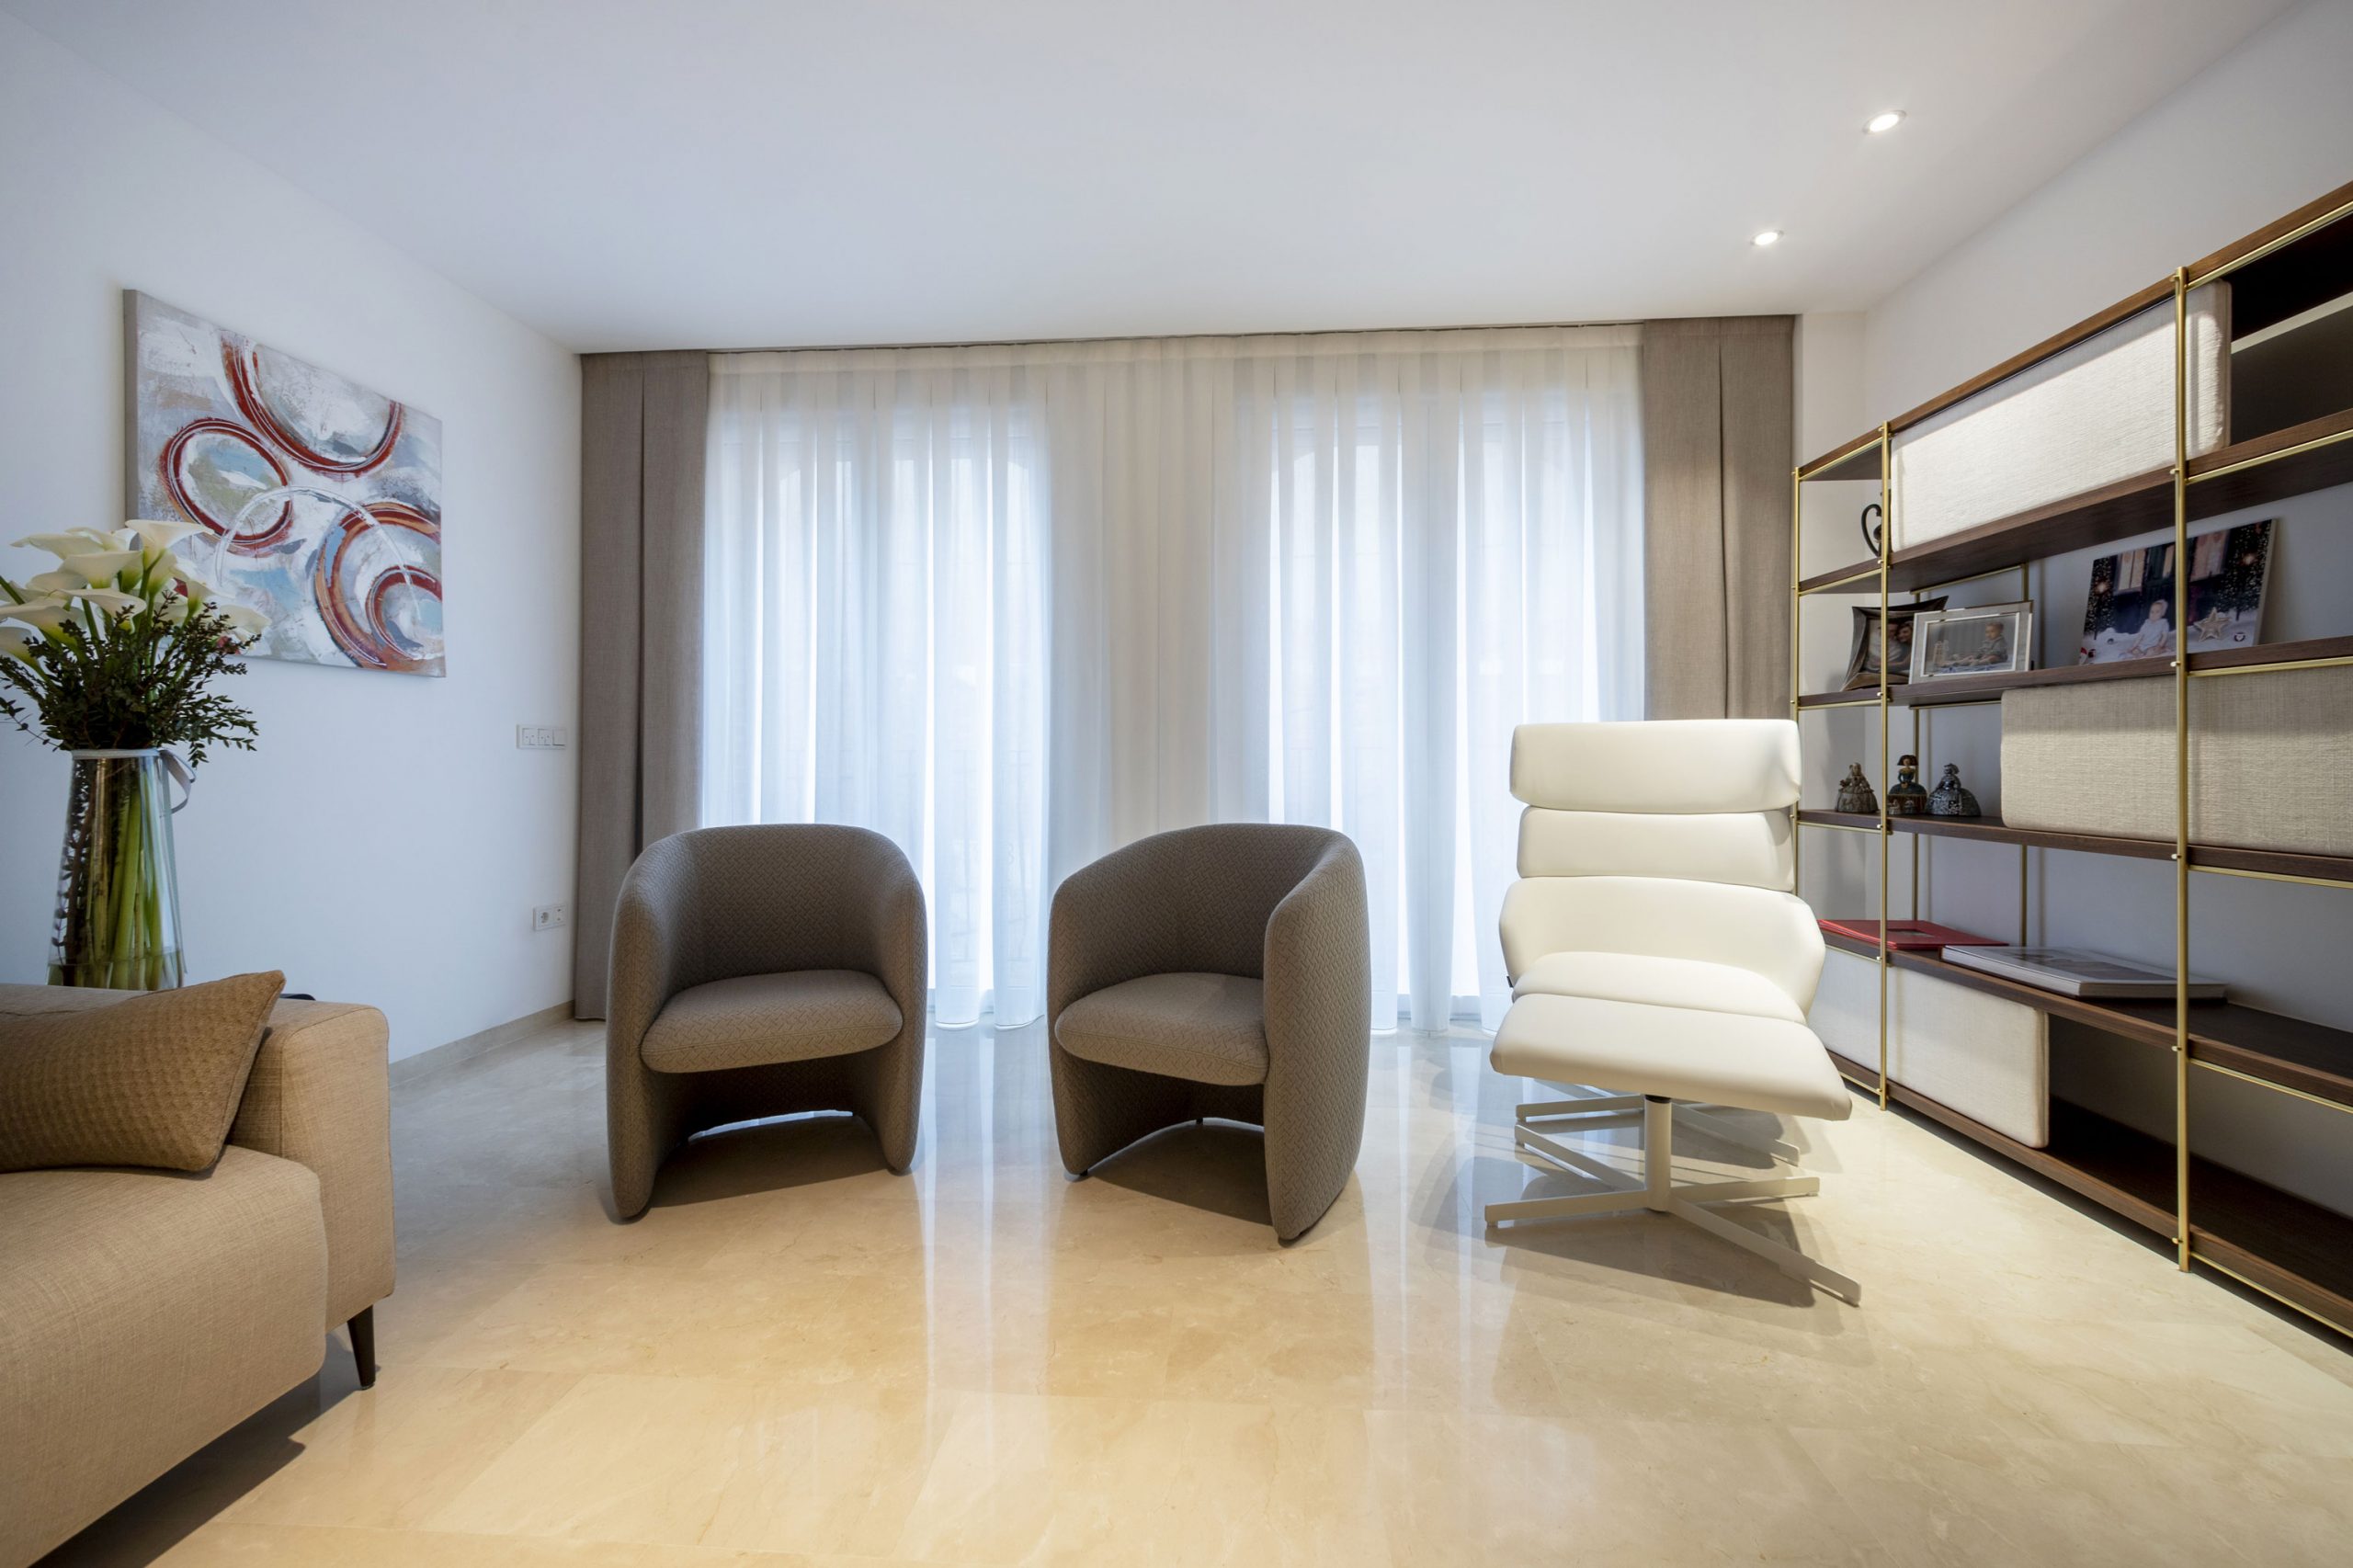 Light and airy interior design by Miguel Calvo